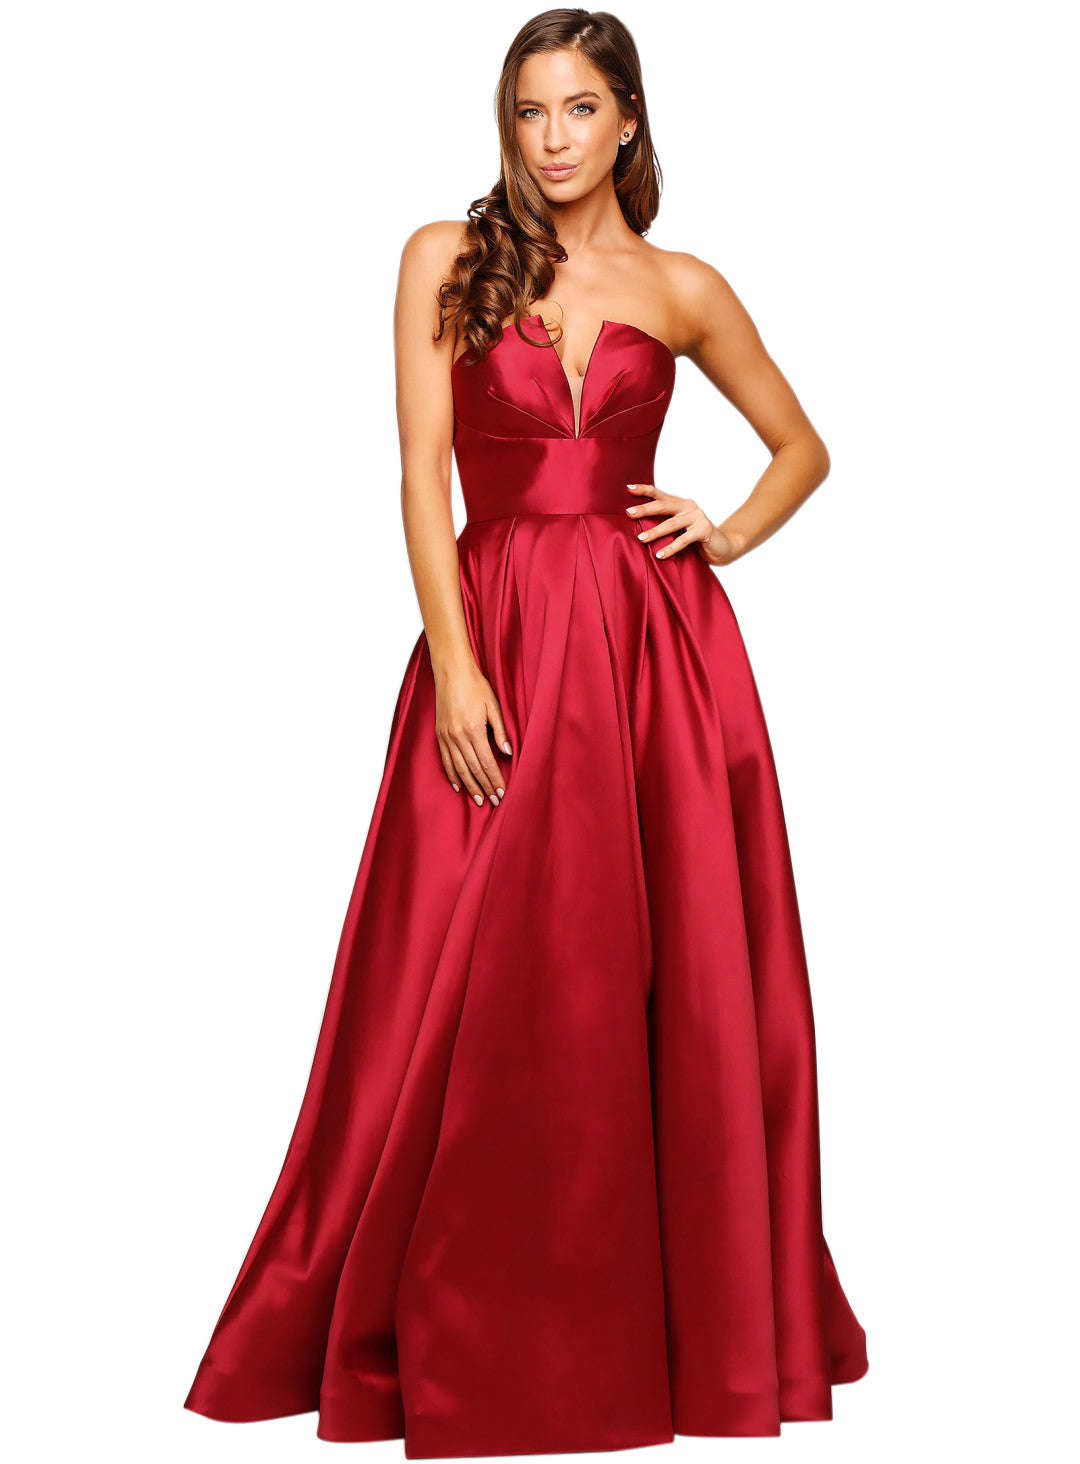 Tinaholy TINAHOLY Lucille Gown TA611 (Red) - RRP $440 - tinaholy-lucille-gown-ta611-red---rrp-0-dress-for-a-night-30756959.jpg